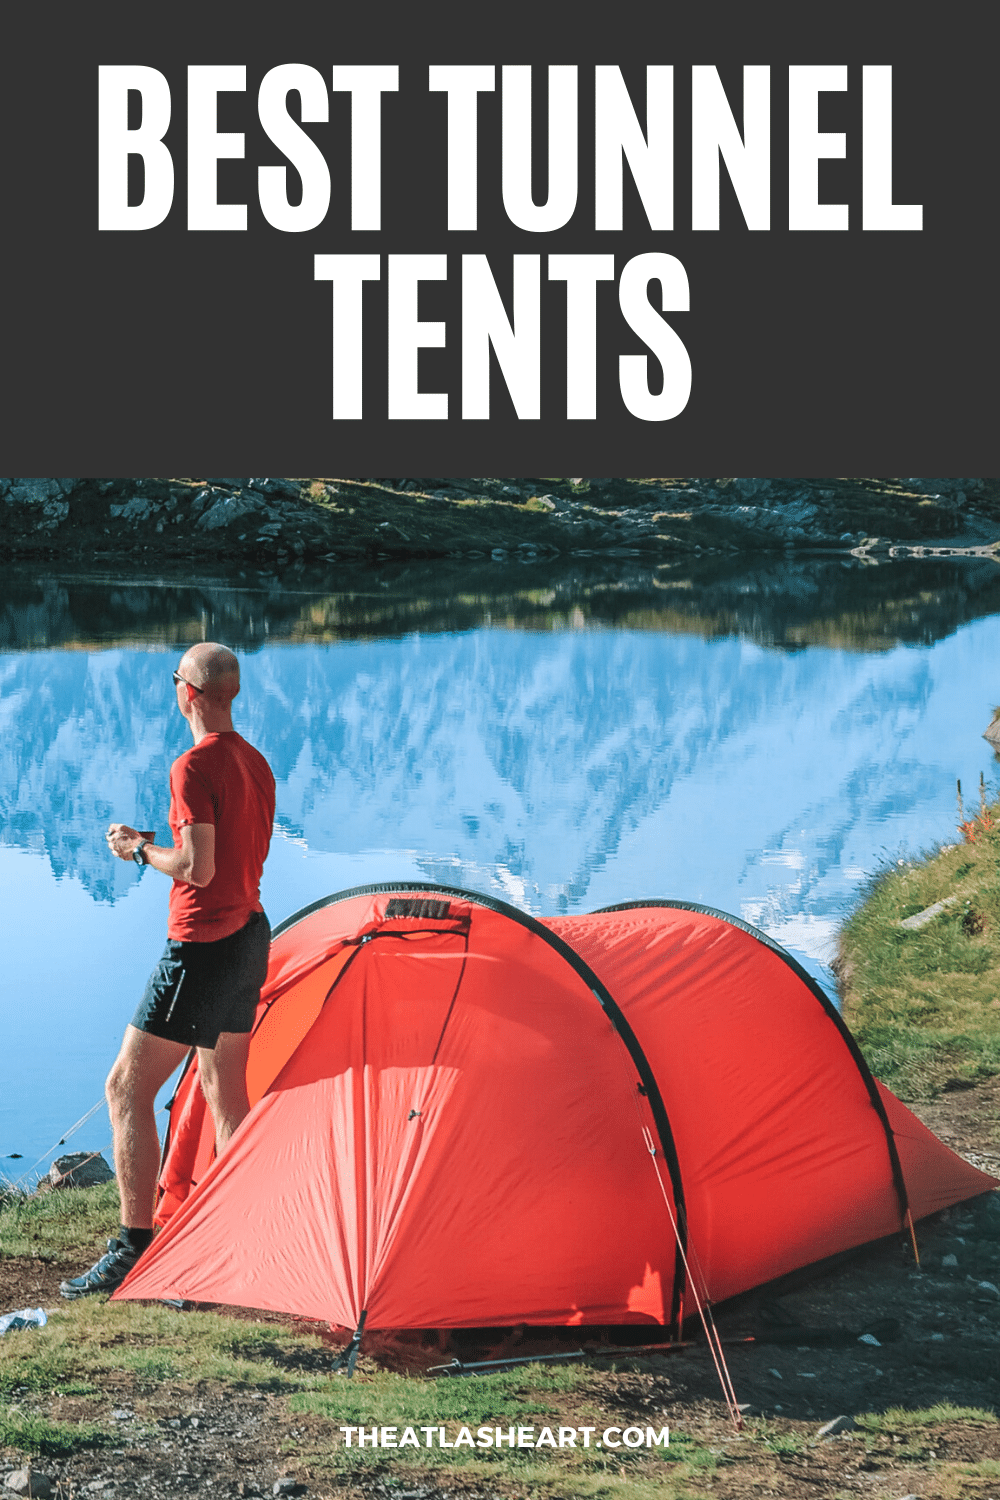 16 Best Tunnel Tents that Stand Up to the Wind (2022 Buying Guide)